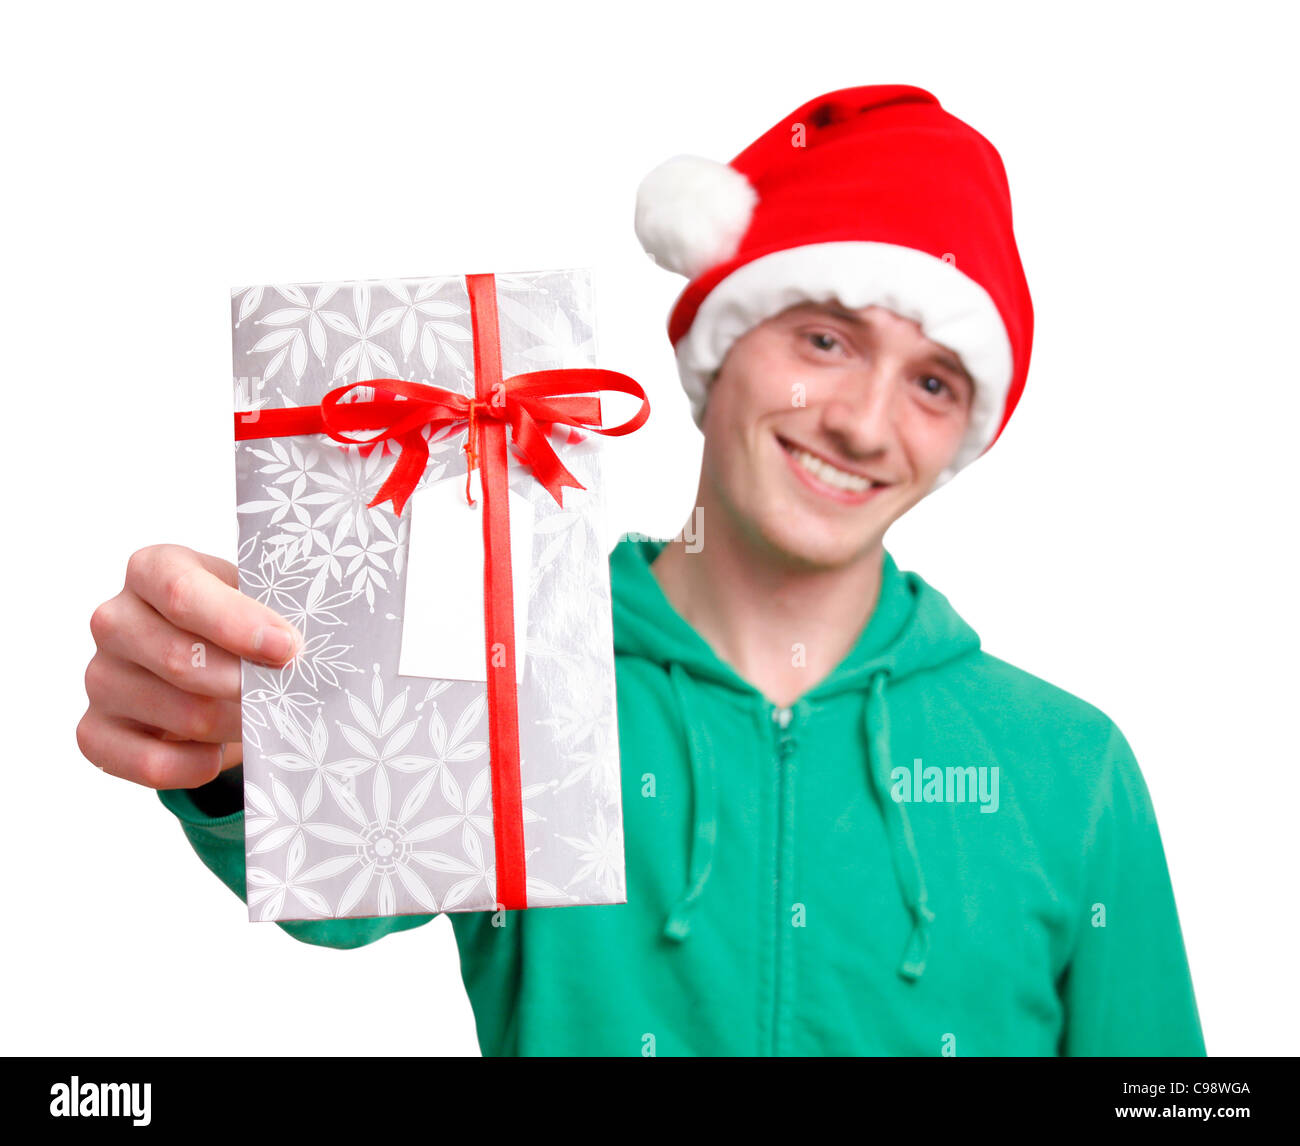 Man with santa hat holding christmas present Banque D'Images